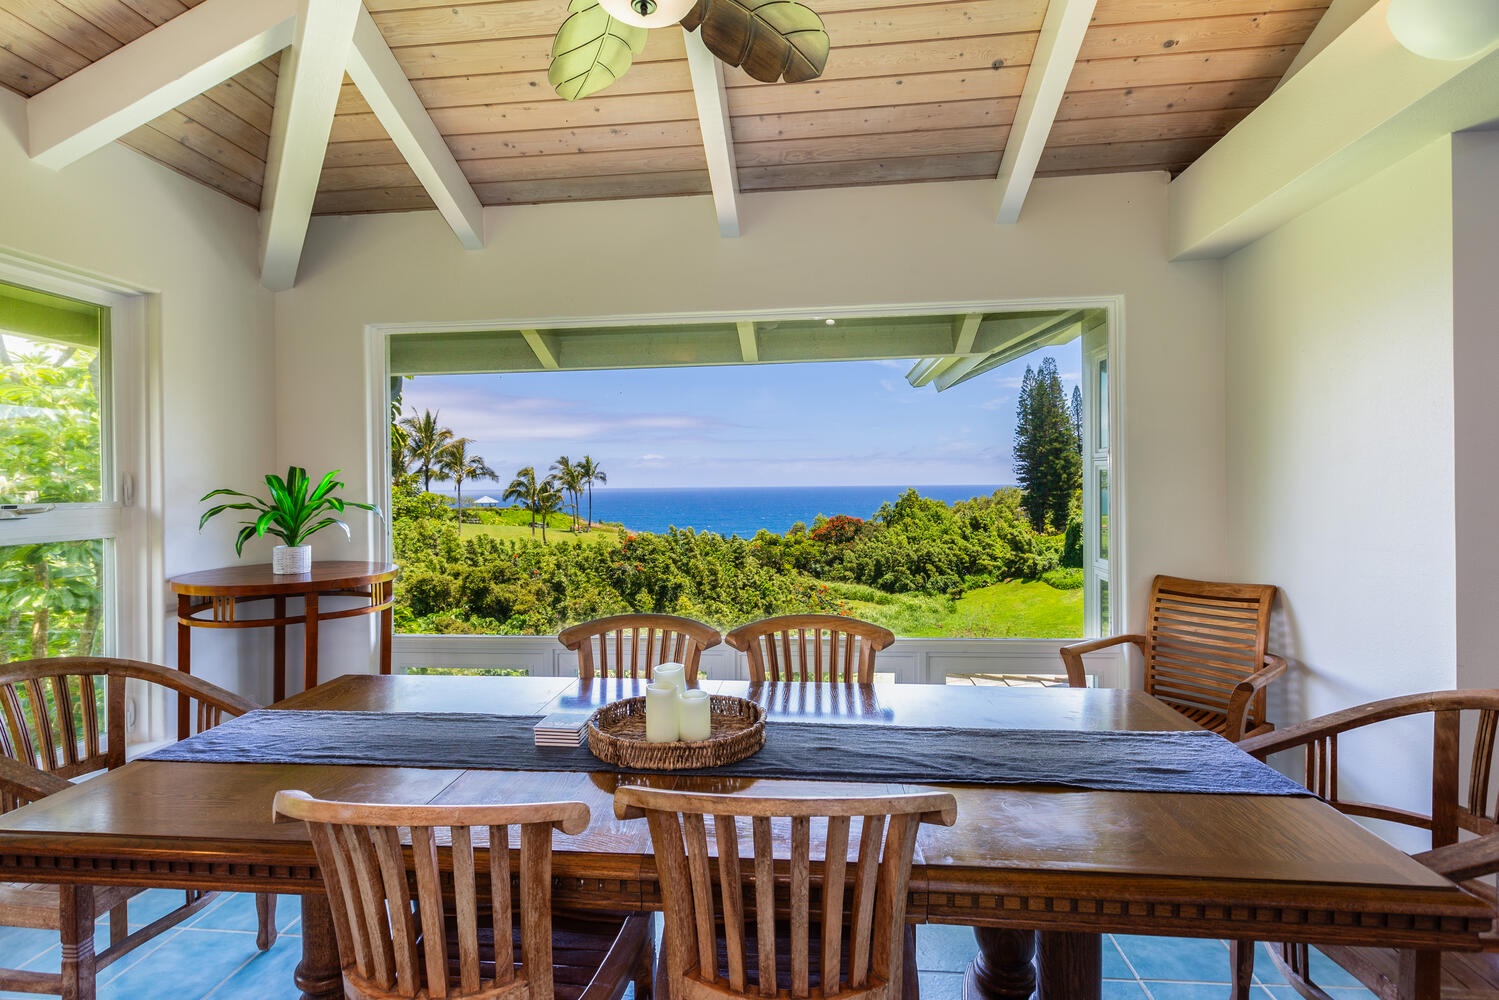 Princeville Vacation Rentals, Wai Lani - Dining transcends the ordinary here, where panoramic views add a touch of magic to every meal.